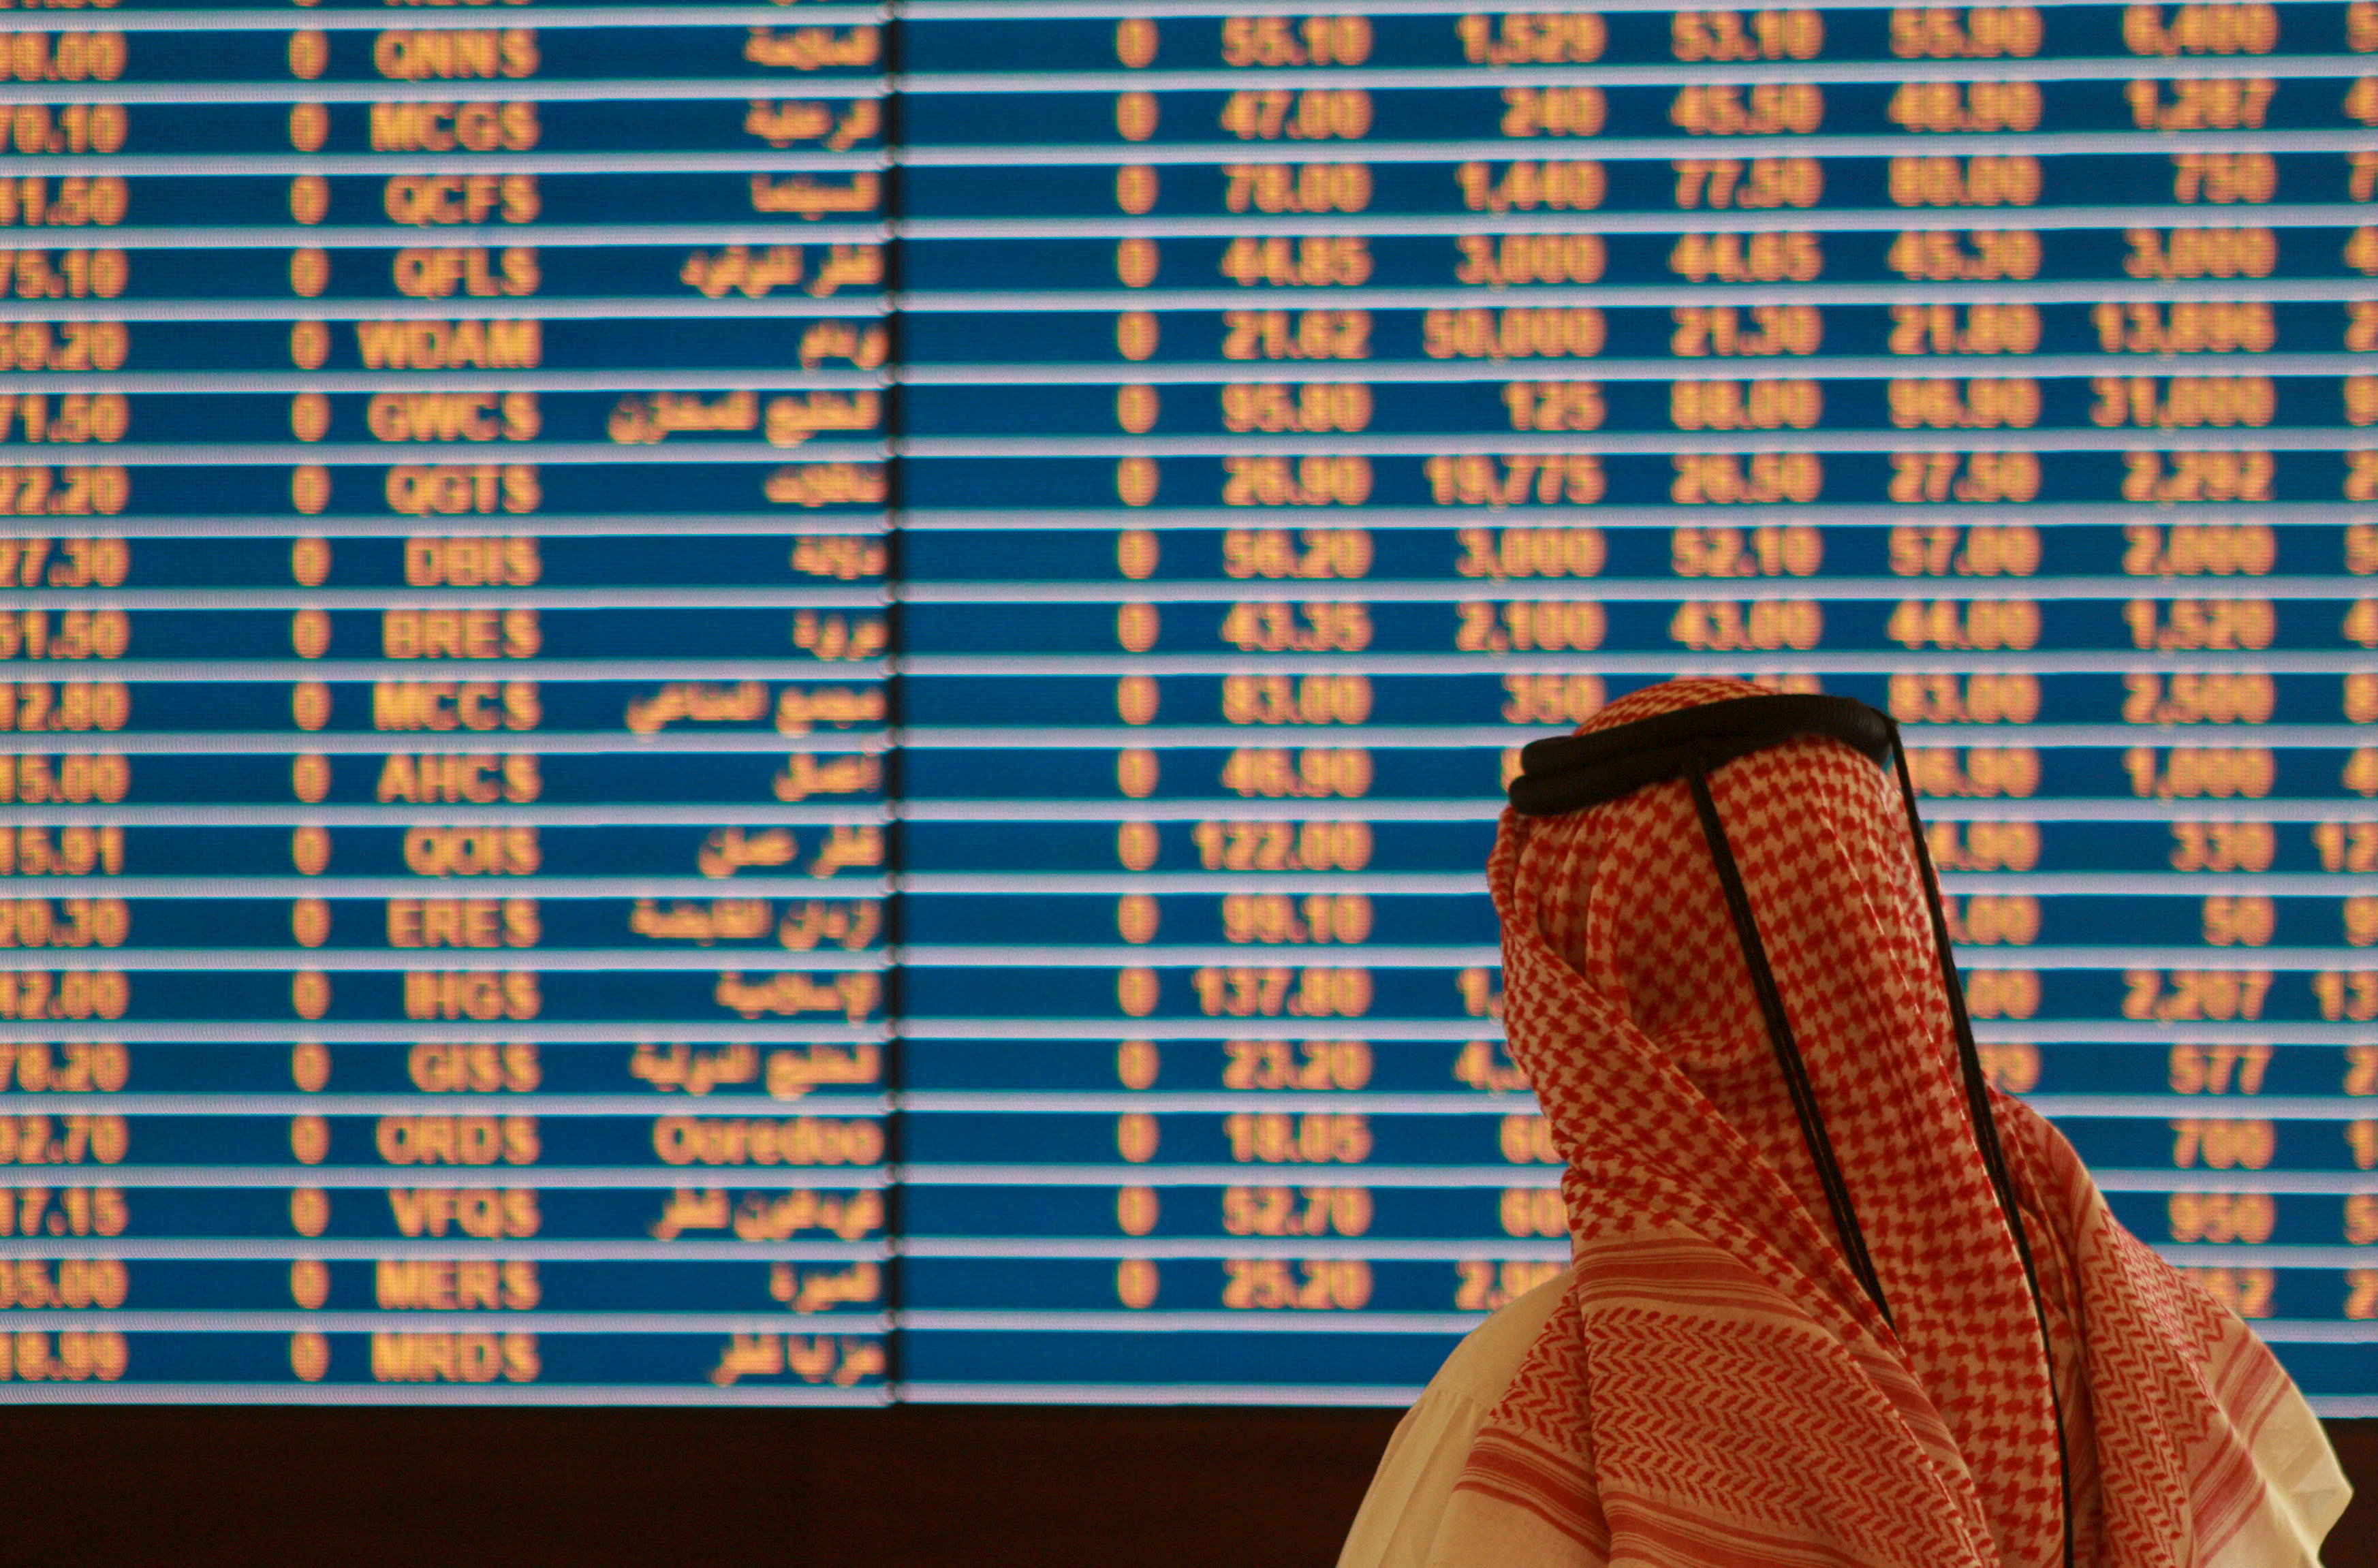 Trader watches an electronic share price display at the Doha Stock Exchange in Doha